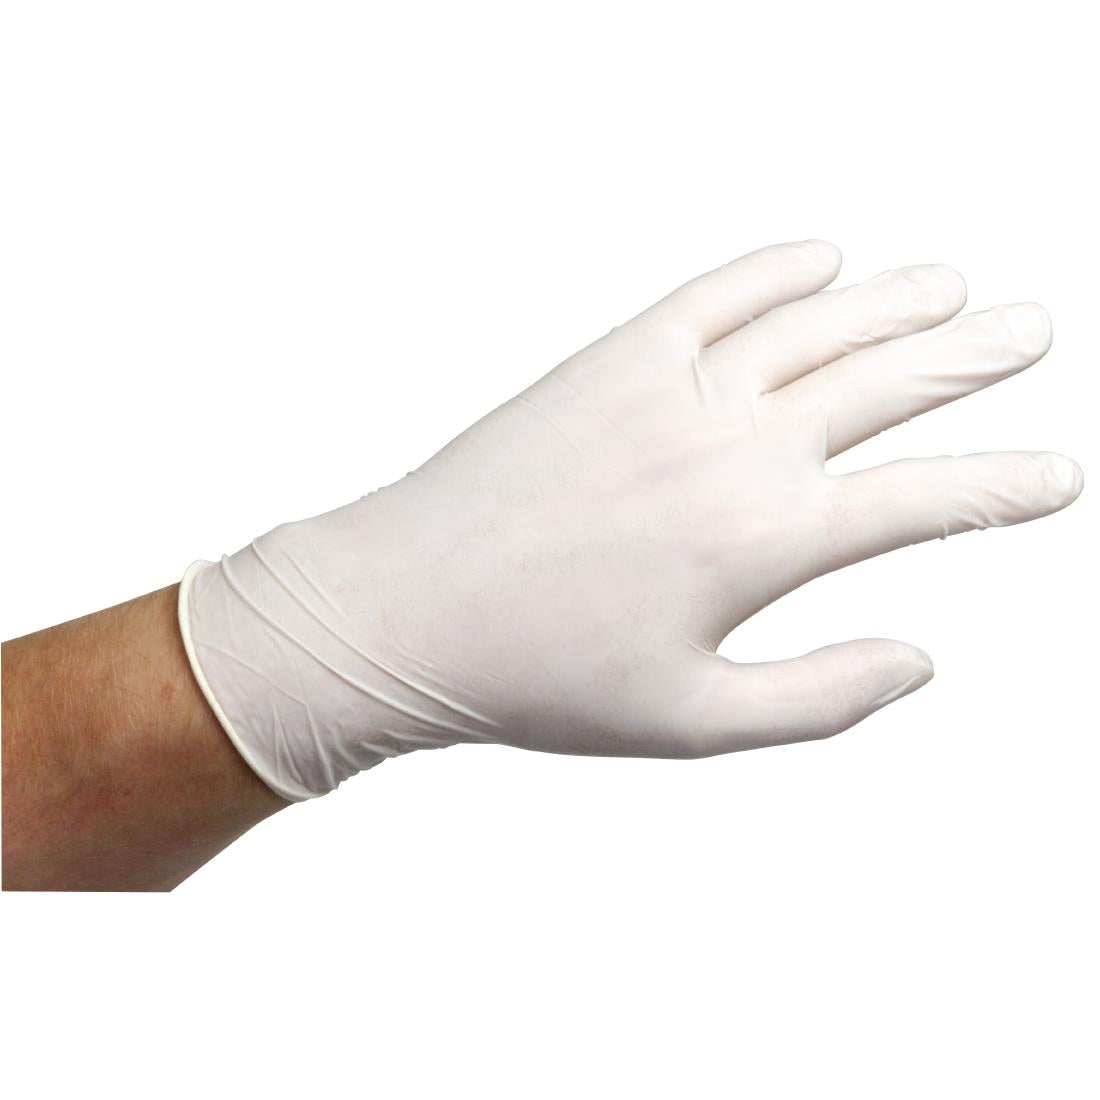 Powdered Latex Gloves L (Pack of 100)